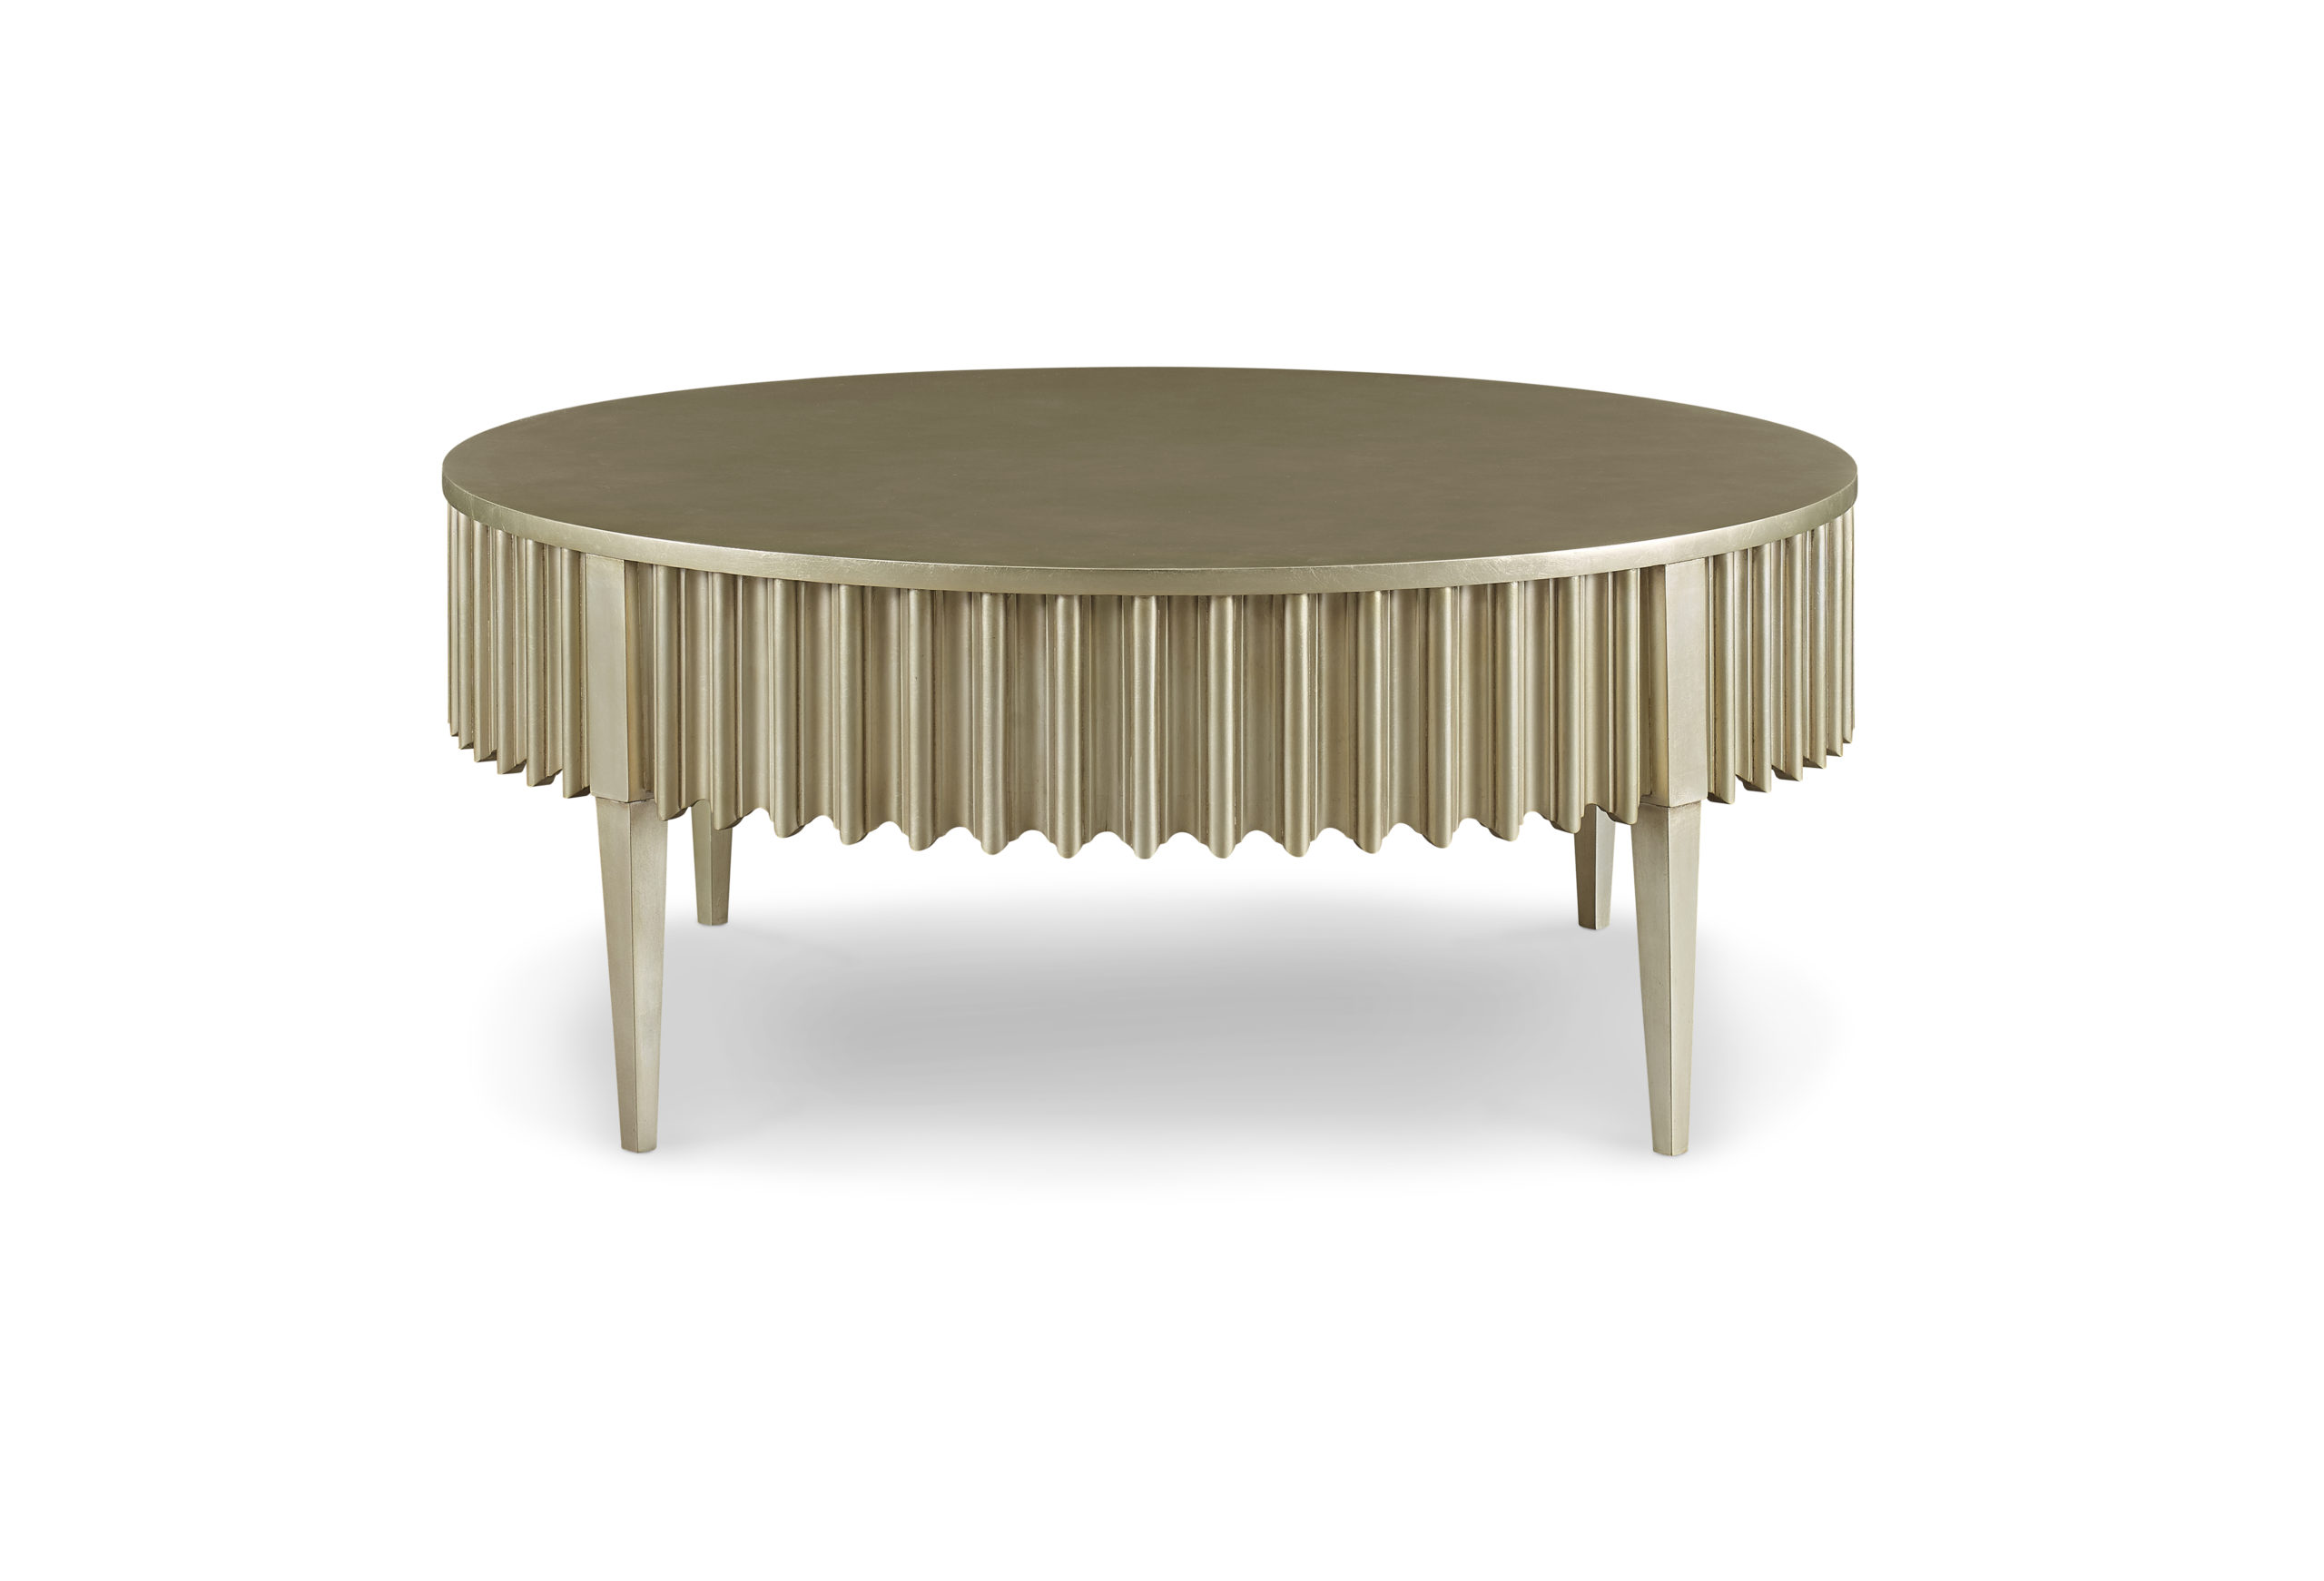 Baker_products_WNWN_reese_cocktail_table_BAA3253_FRONT-scaled-2